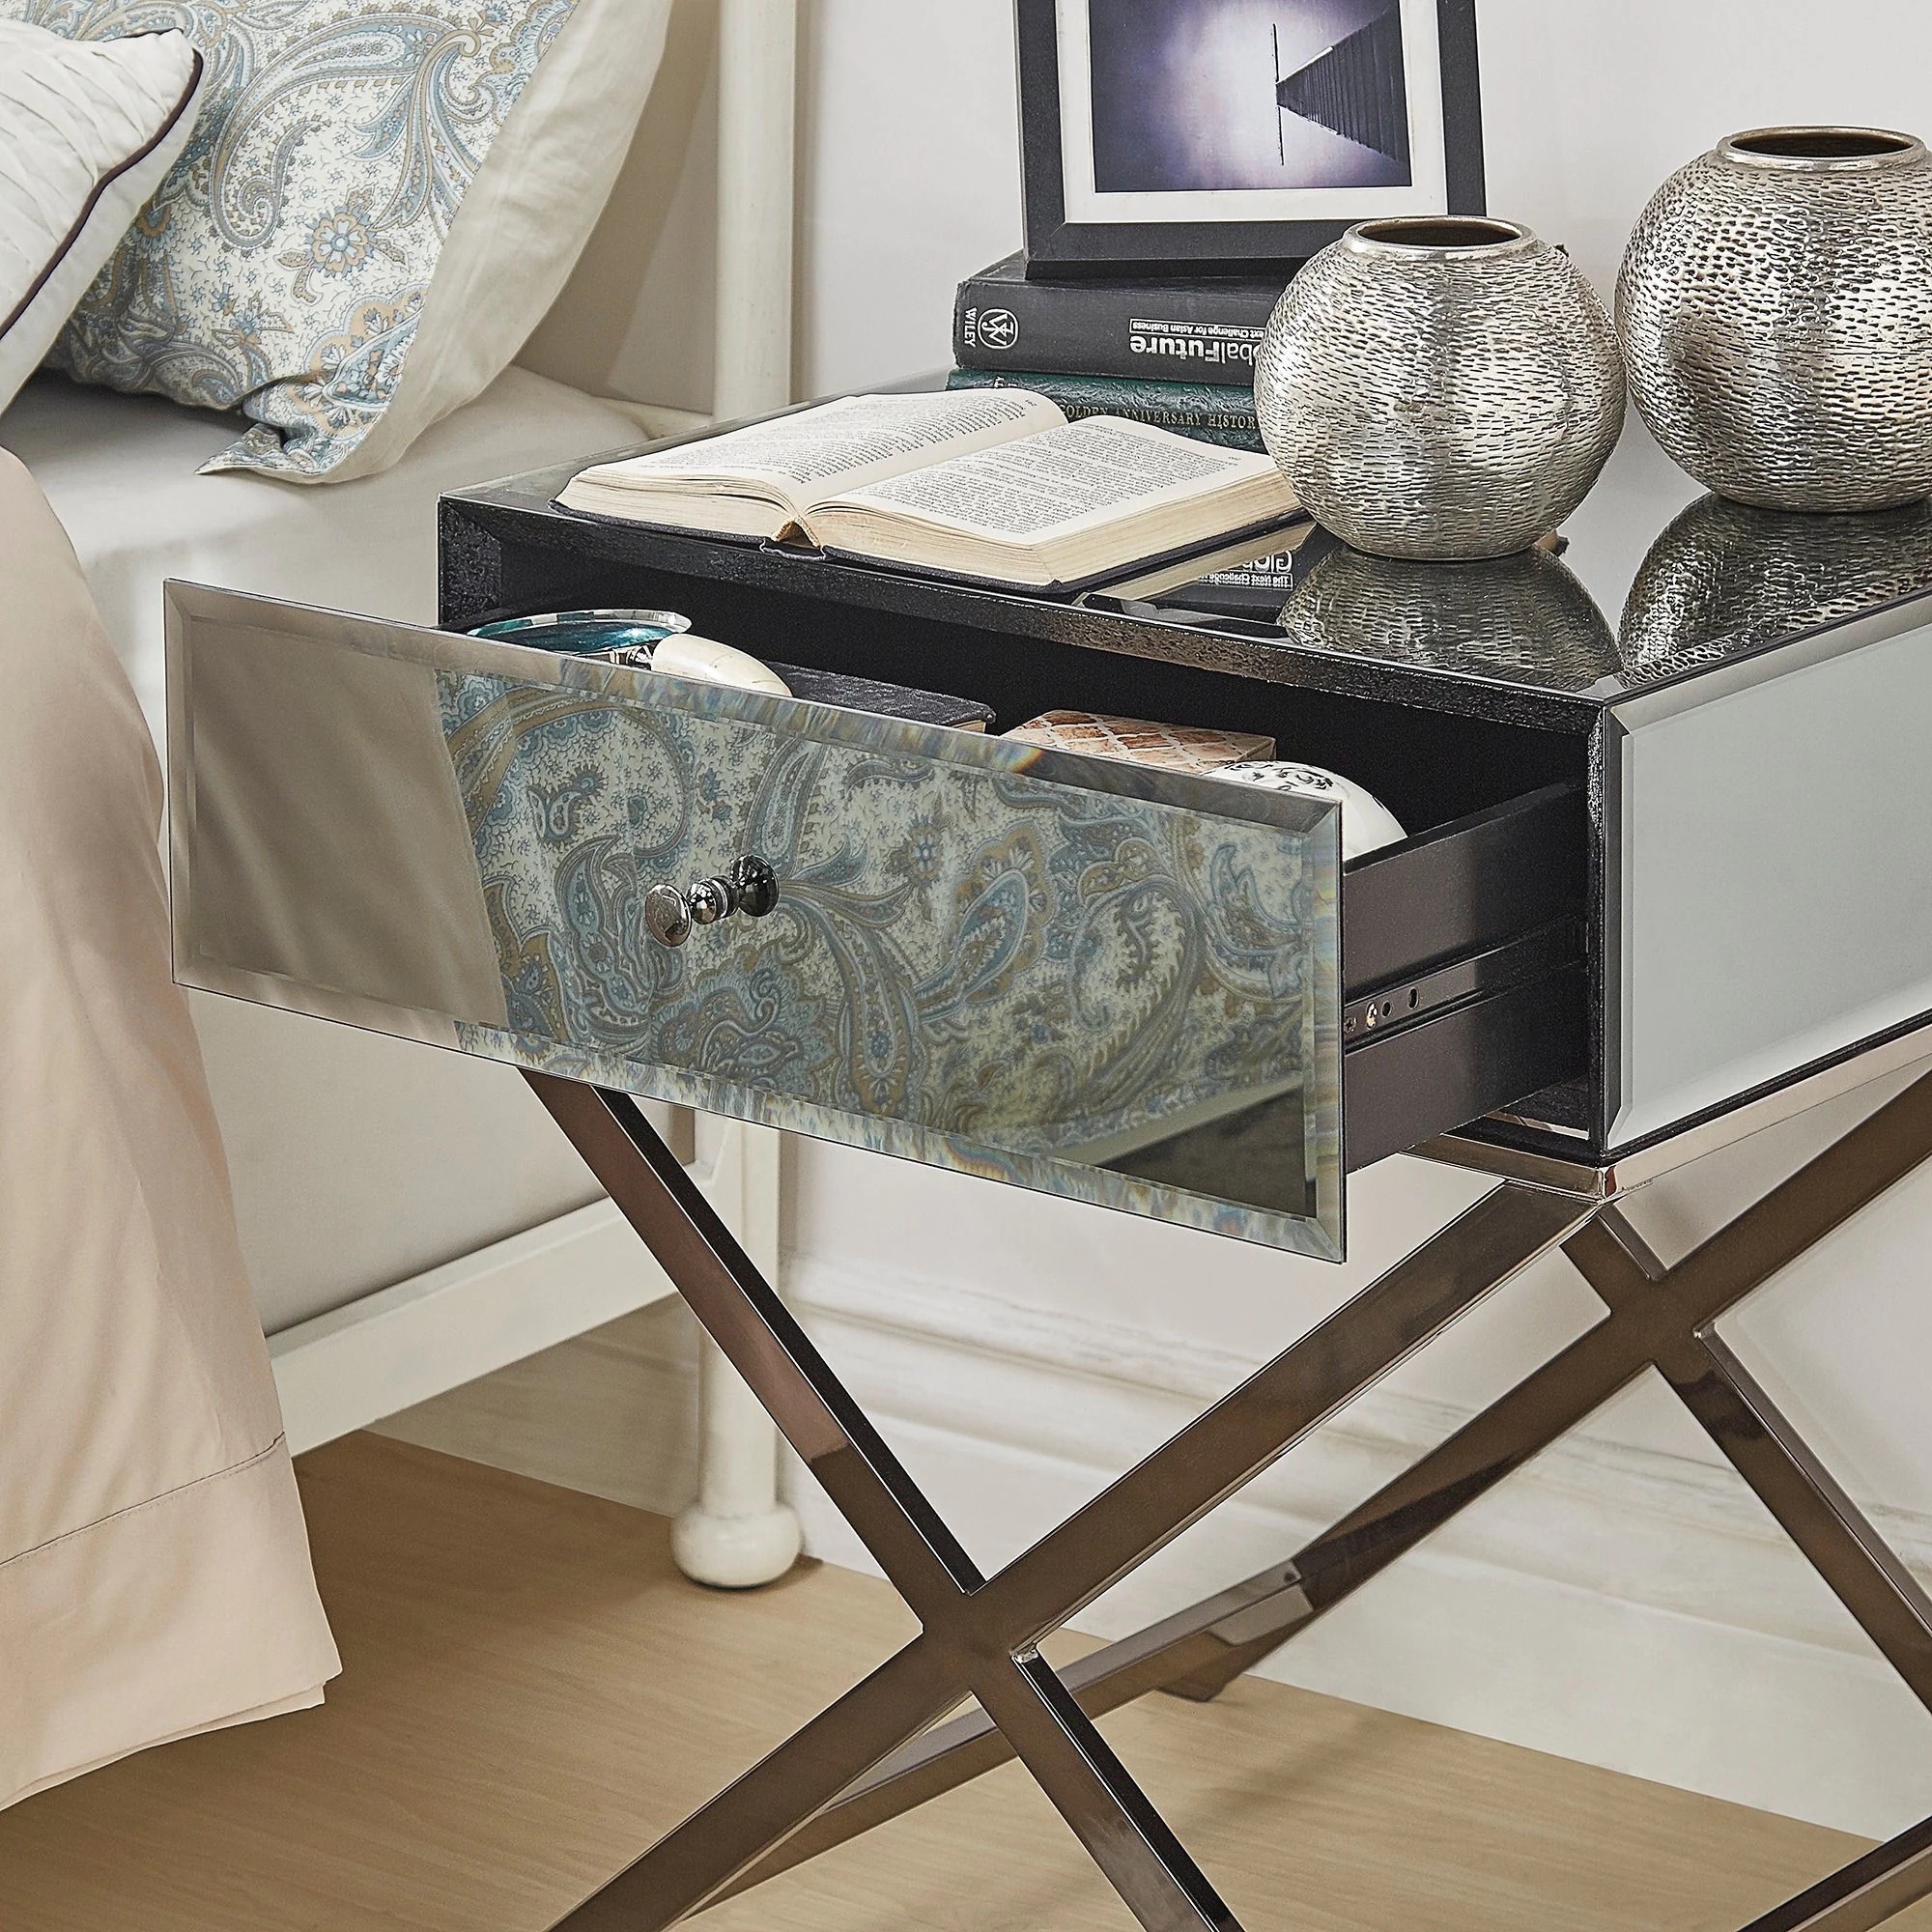 X-Base Mirrored Accent Campaign Table